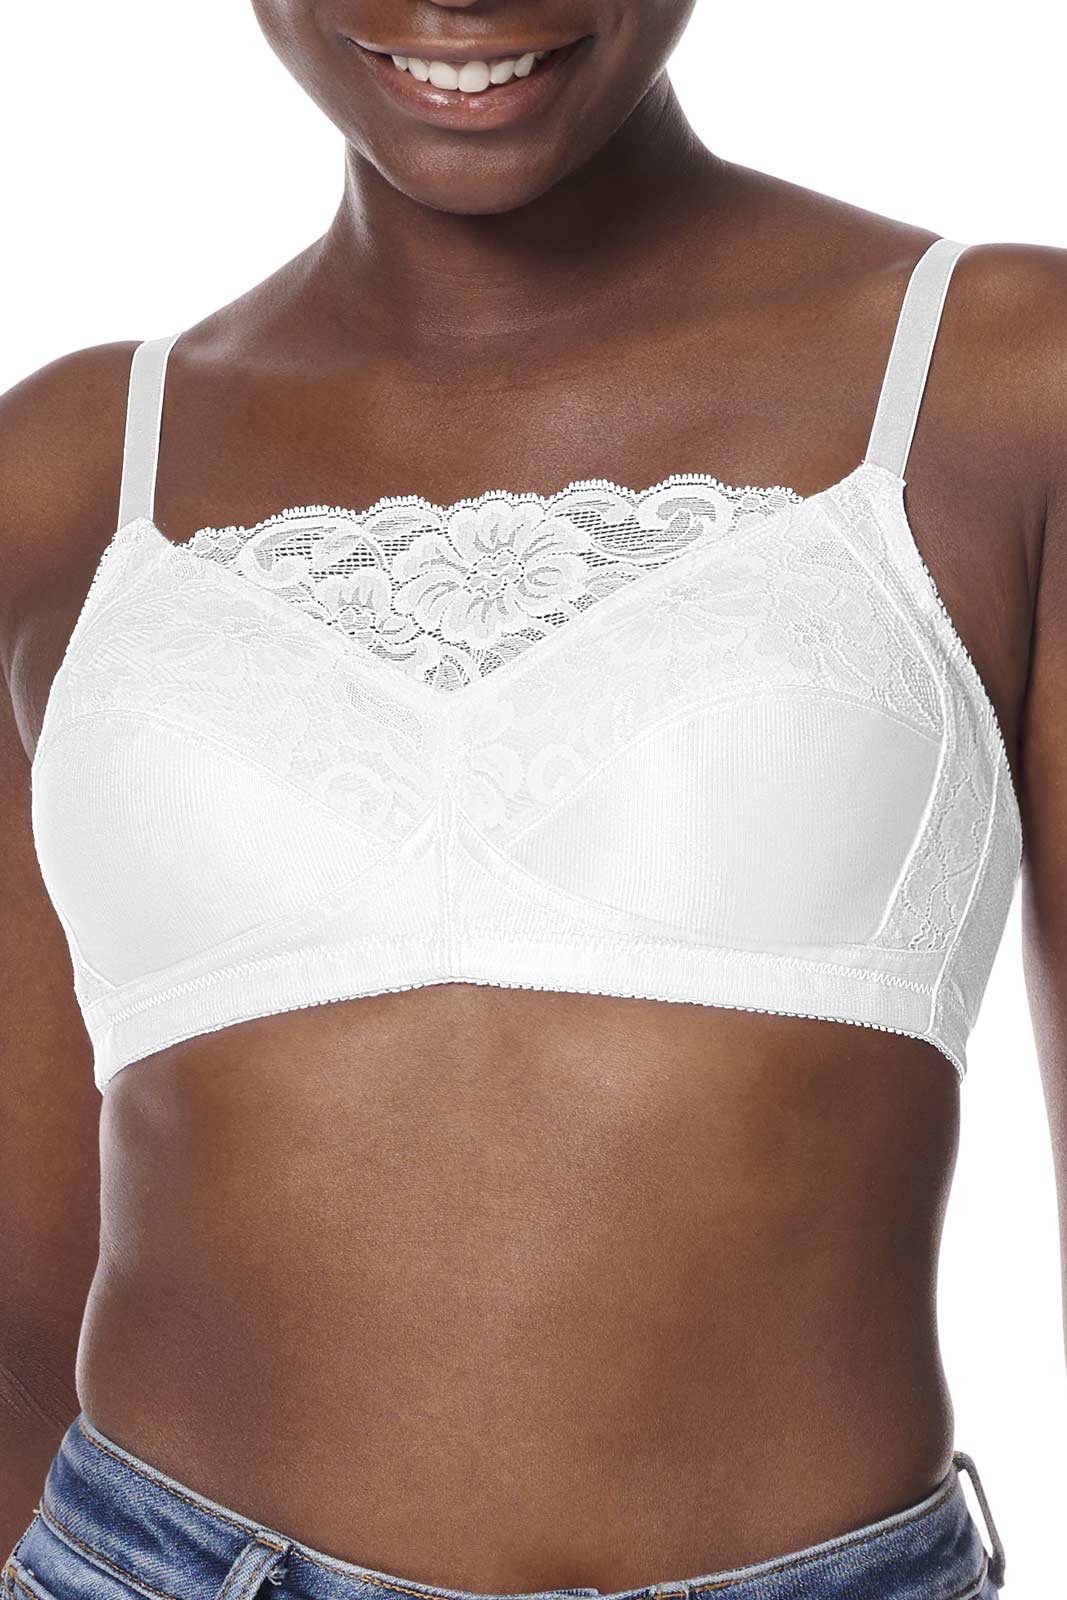 Amoena Isabel Camisole Wire-Free Bra Soft Cup, Size 36DD, Candlelight Ref#  5211836DDCL KU56661325-Each - MAR-J Medical Supply, Inc.